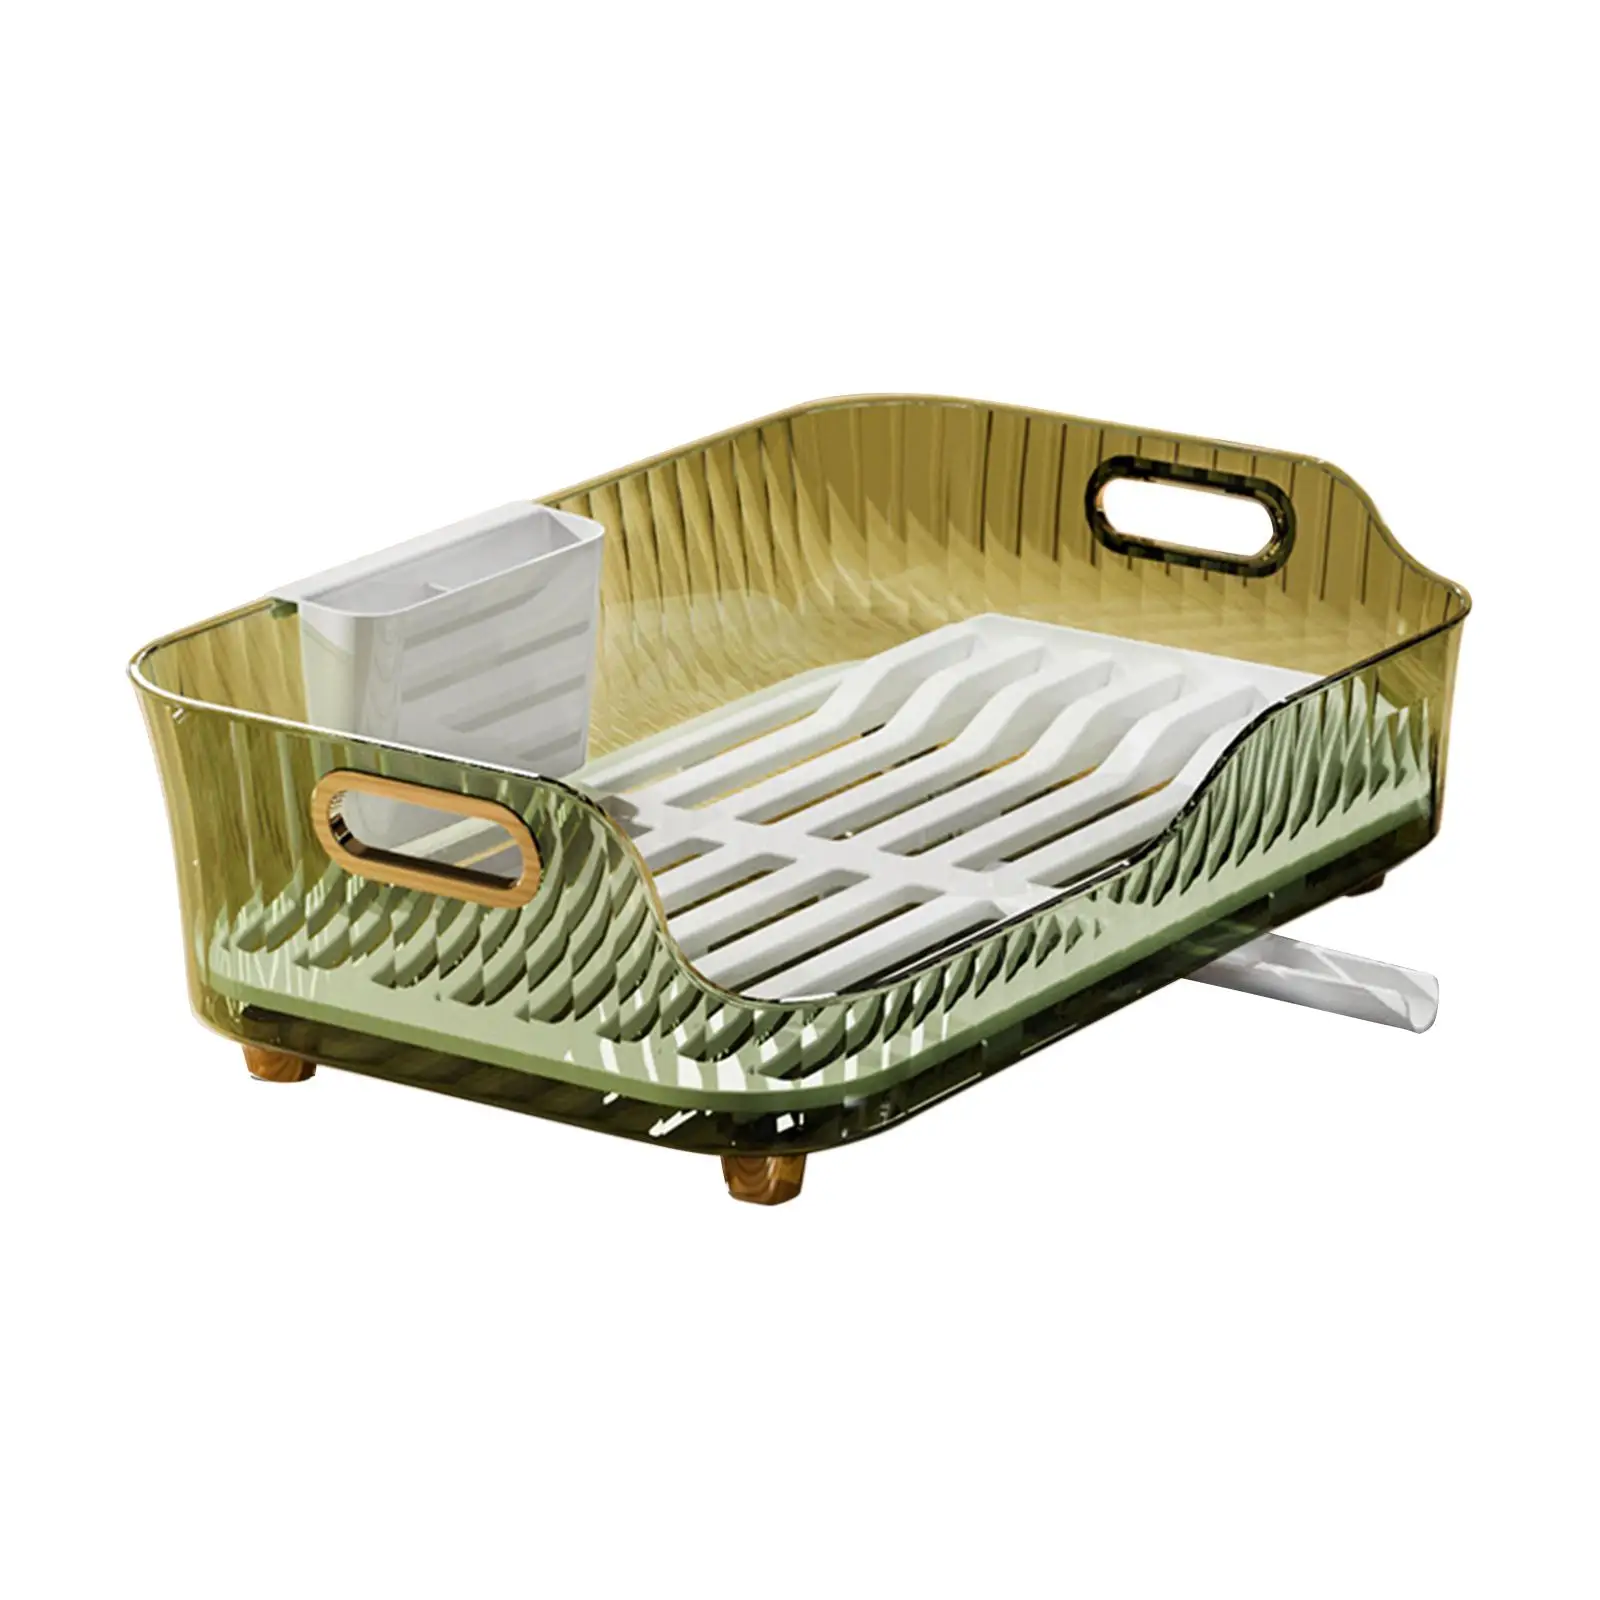 Kitchen Counter Dish Drying Rack Drip Tray with Swivel Spout Modern Design Accessory Size 42.5x26.5x13cm Easily Install Durable